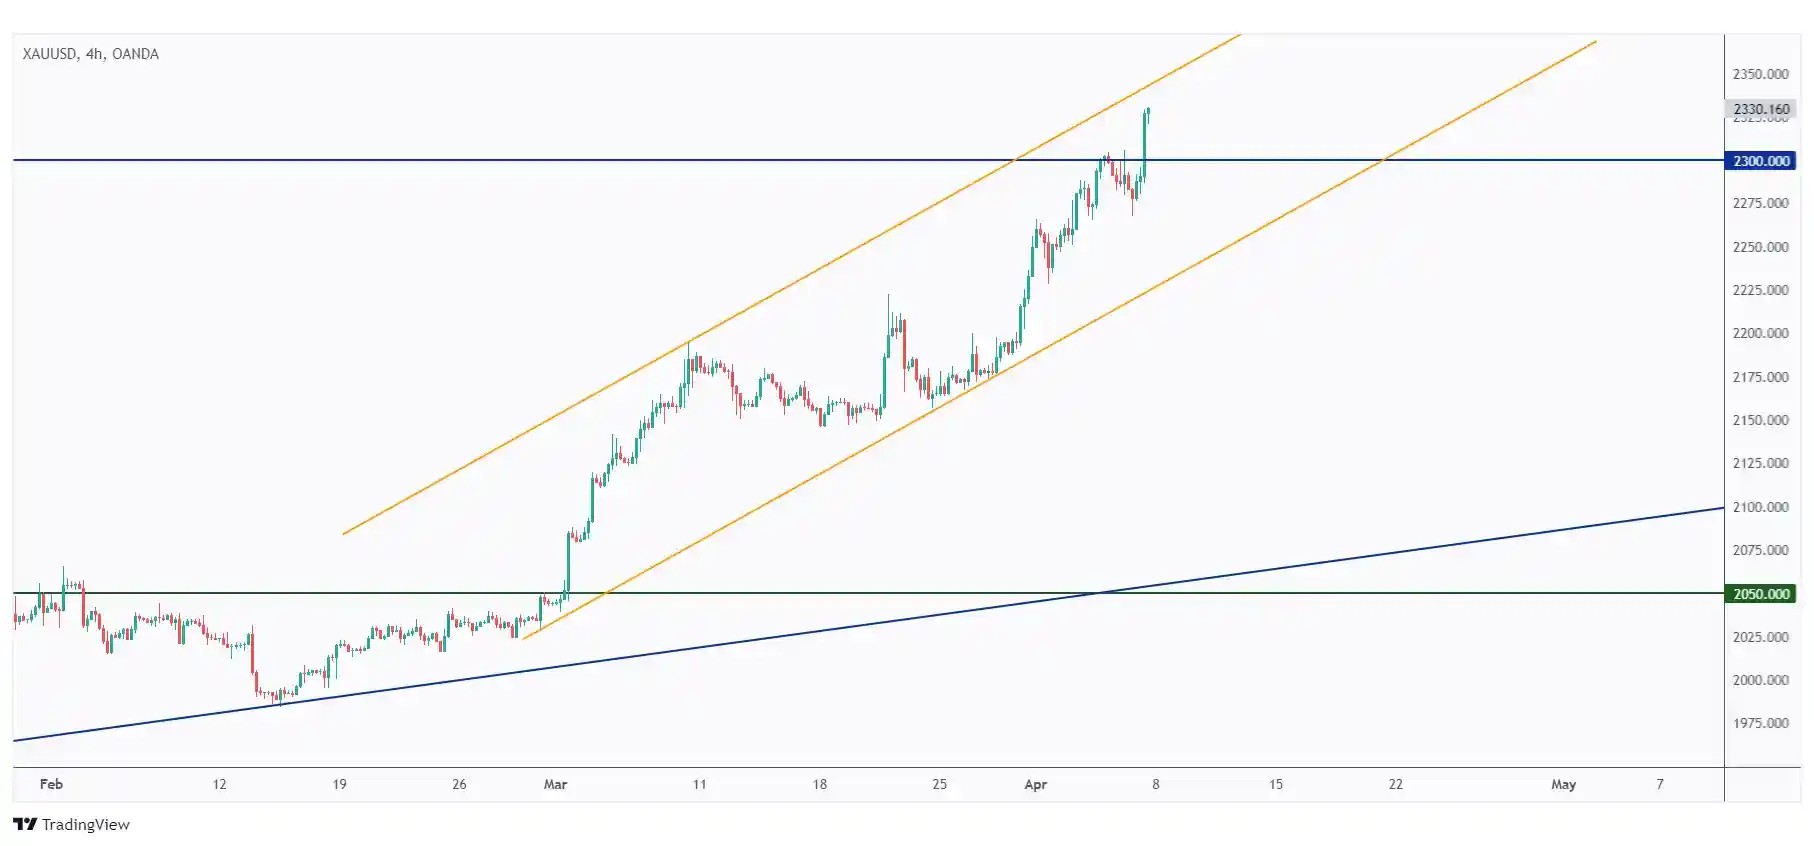 GOLD 4H chart is also bullish medium-term trading within the rising channel.